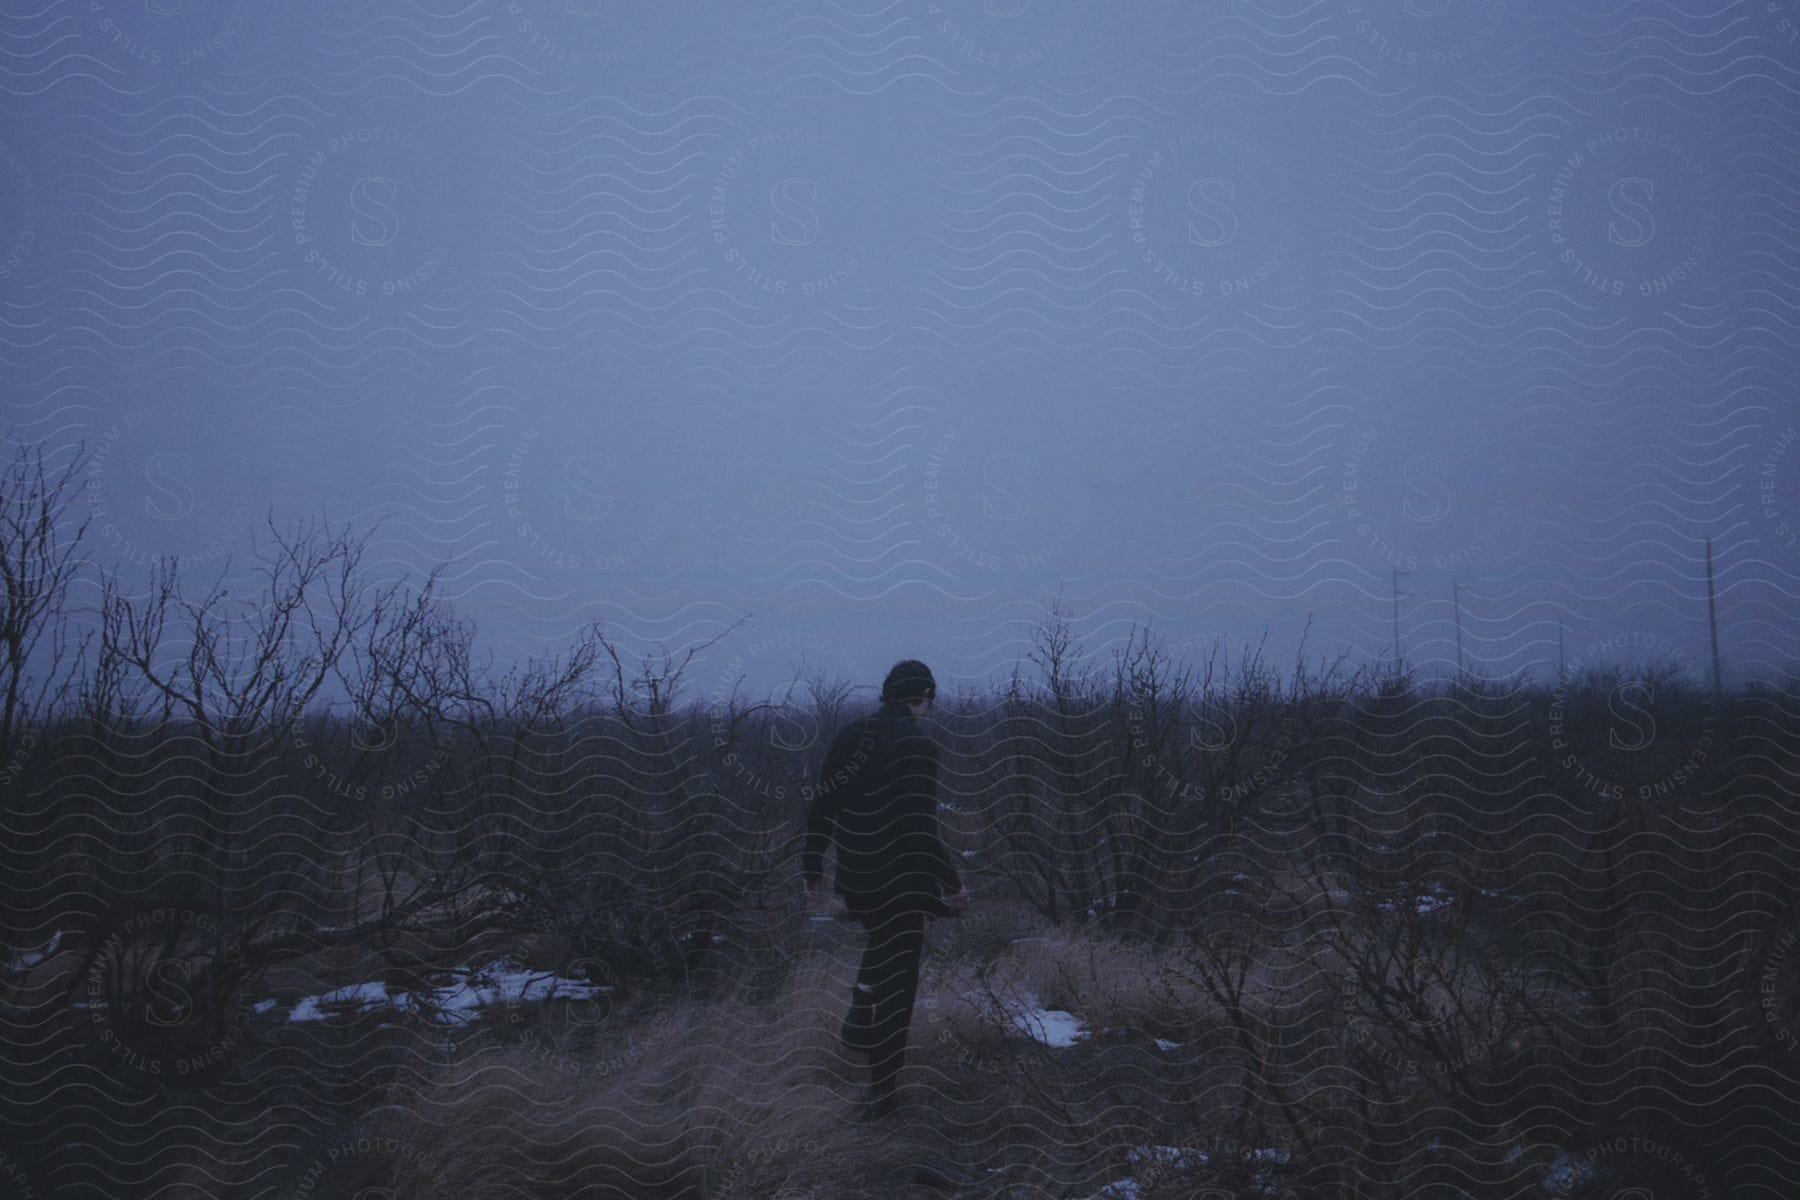 A person walking in a foggy wilderness